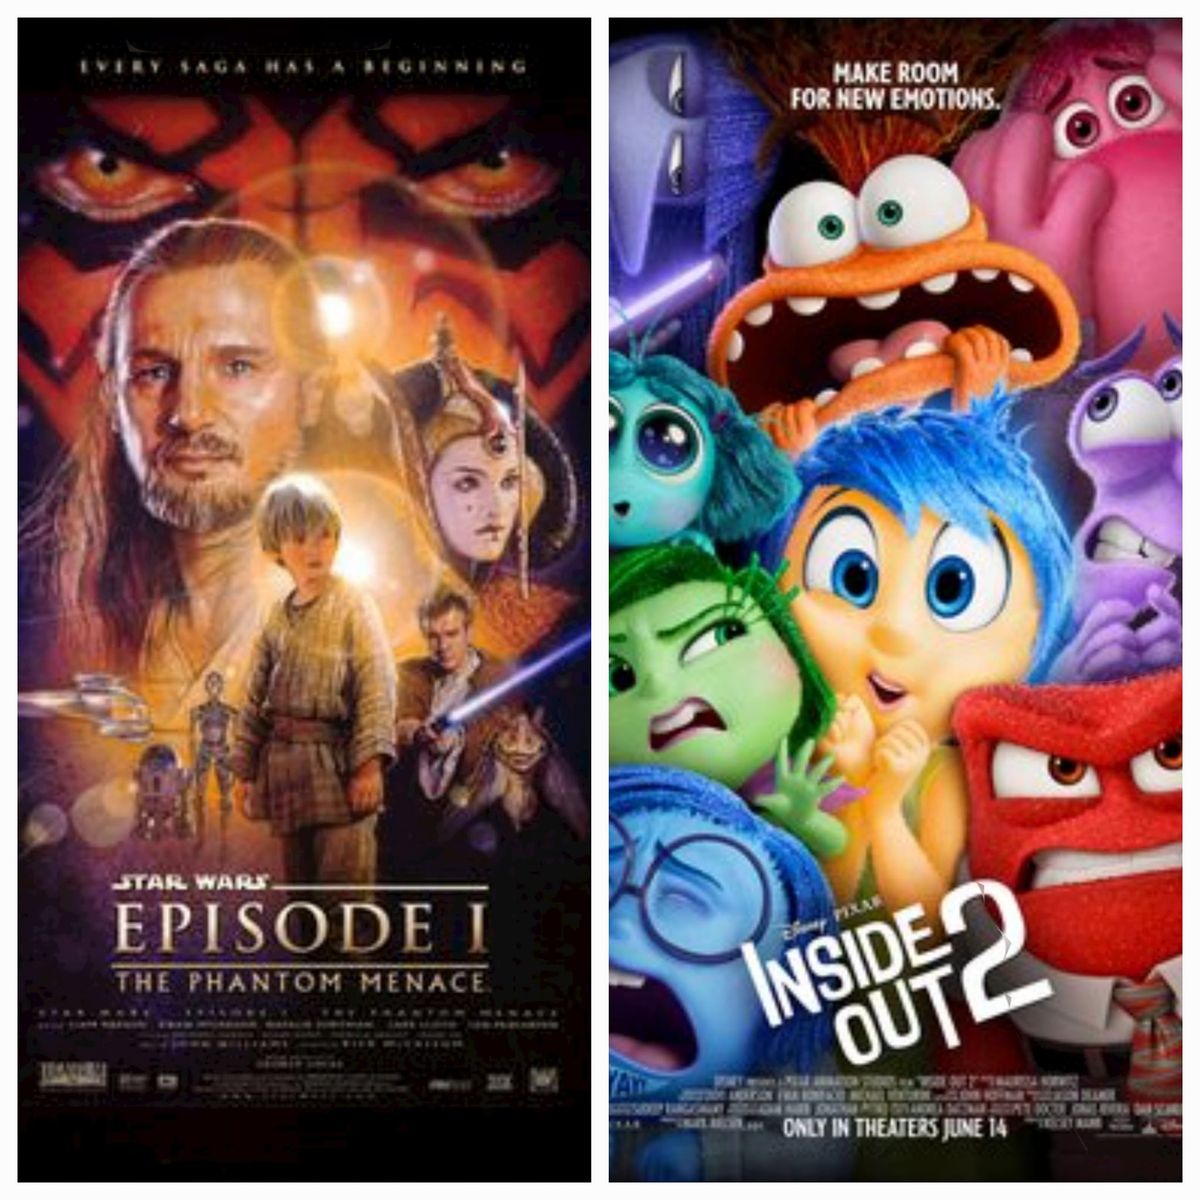 Double Feature of Star Wars Ep. 1 and Inside Out 2